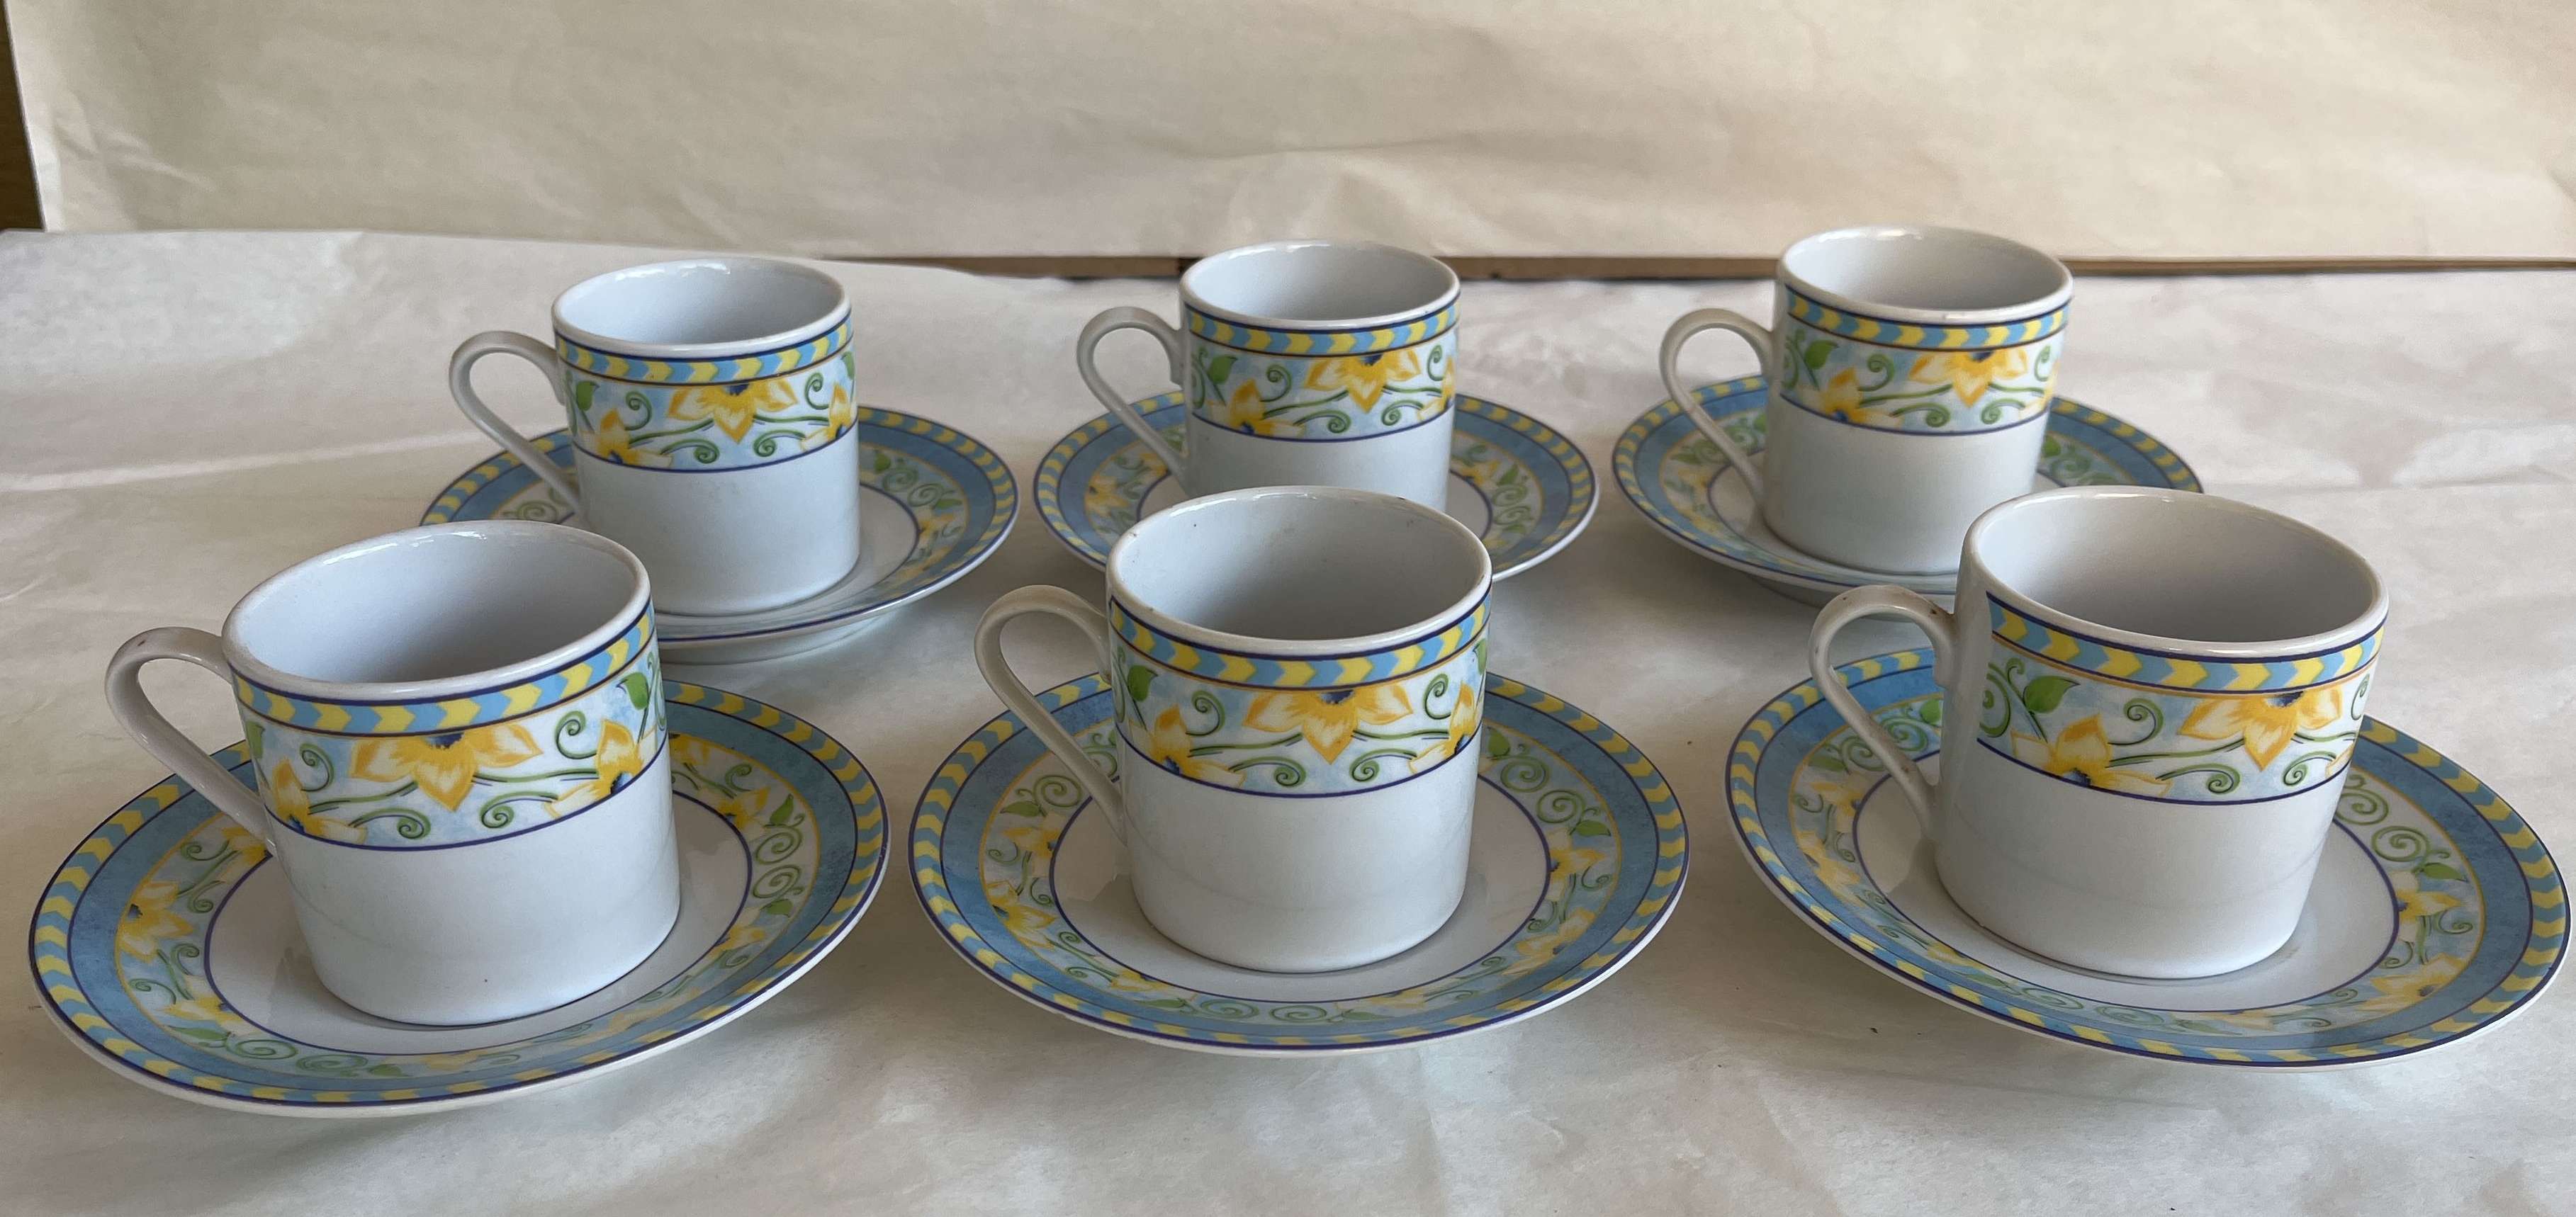 Ceramic Coffee Cup Saucer Set Cup and Saucer for Tea & Coffee Vintage Mid  Century Cups Saucers Christmas Gift for Mum Indian Kitchen Gift 